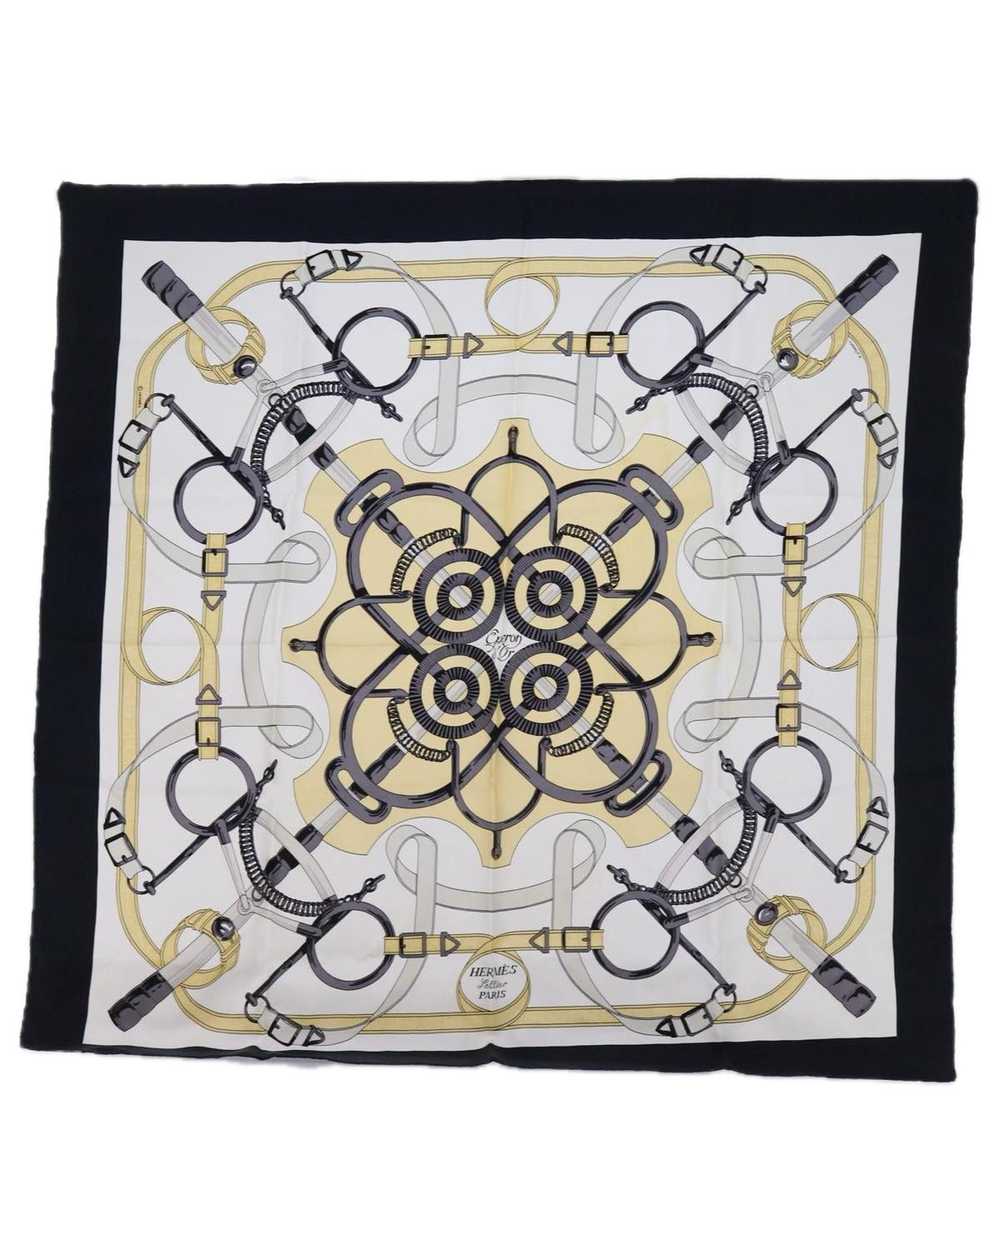 Hermes Silk Eperon dOr Scarf with Horse Motif - image 1